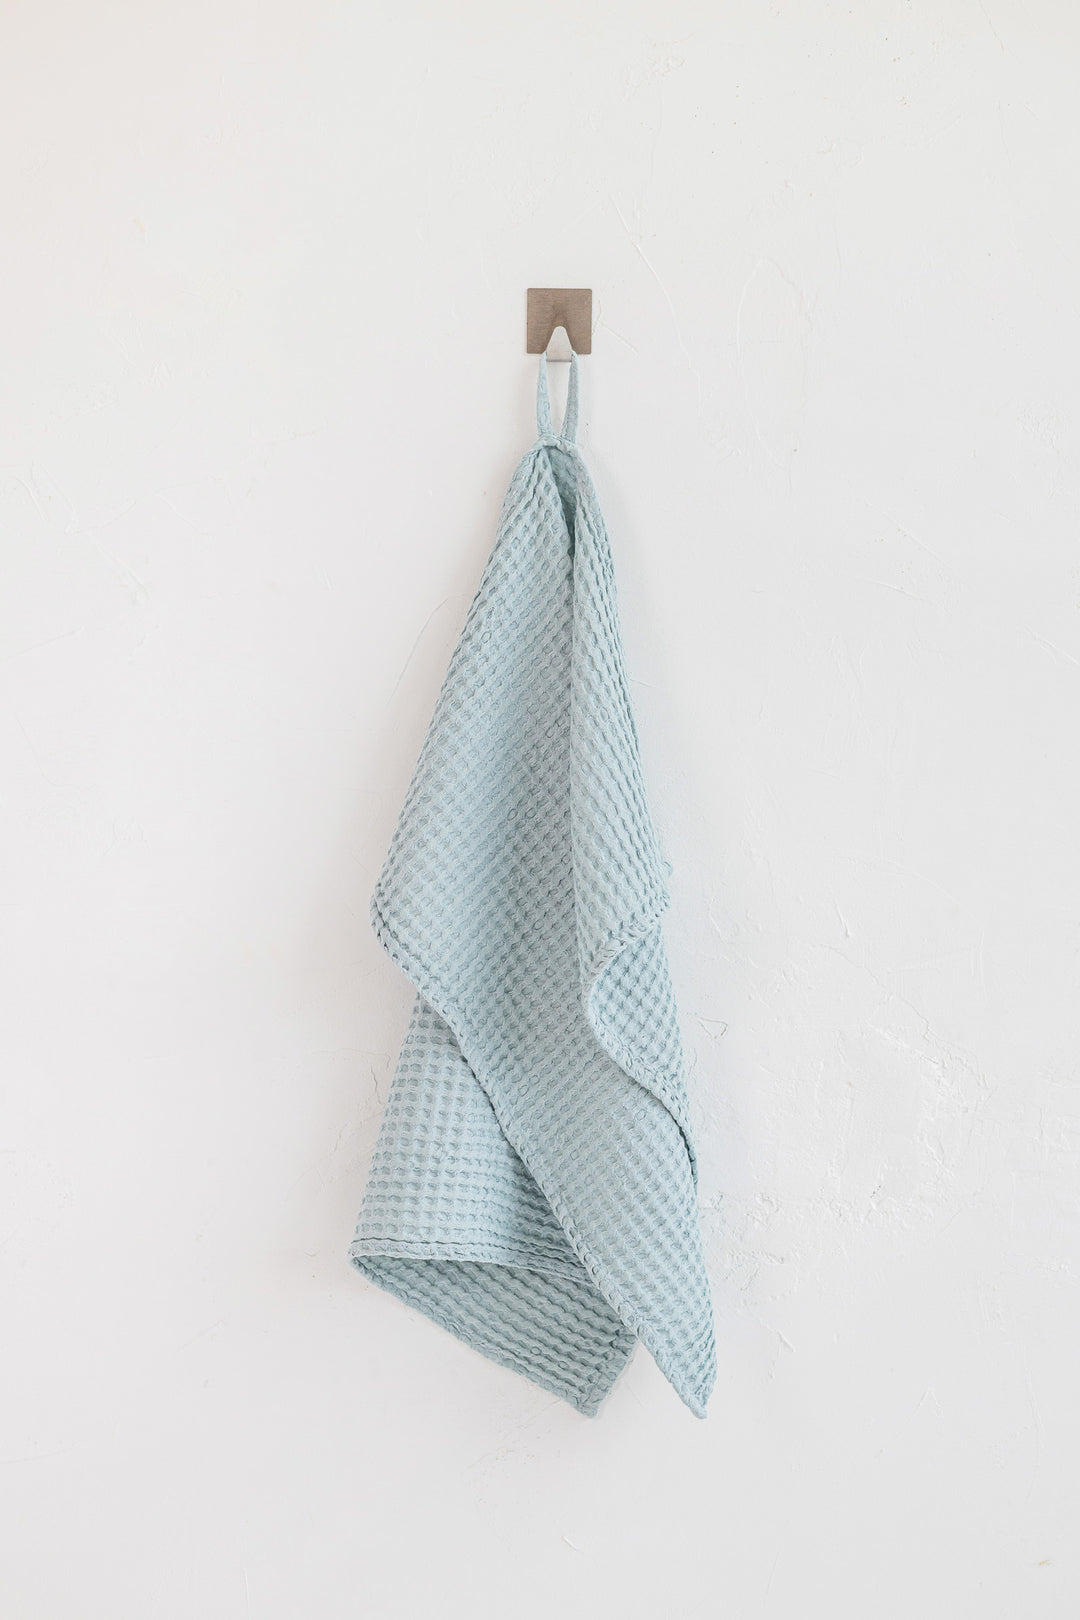 Hanging Linen Waffle Kitchen Towel In Sky Blue Color - Daily Linen